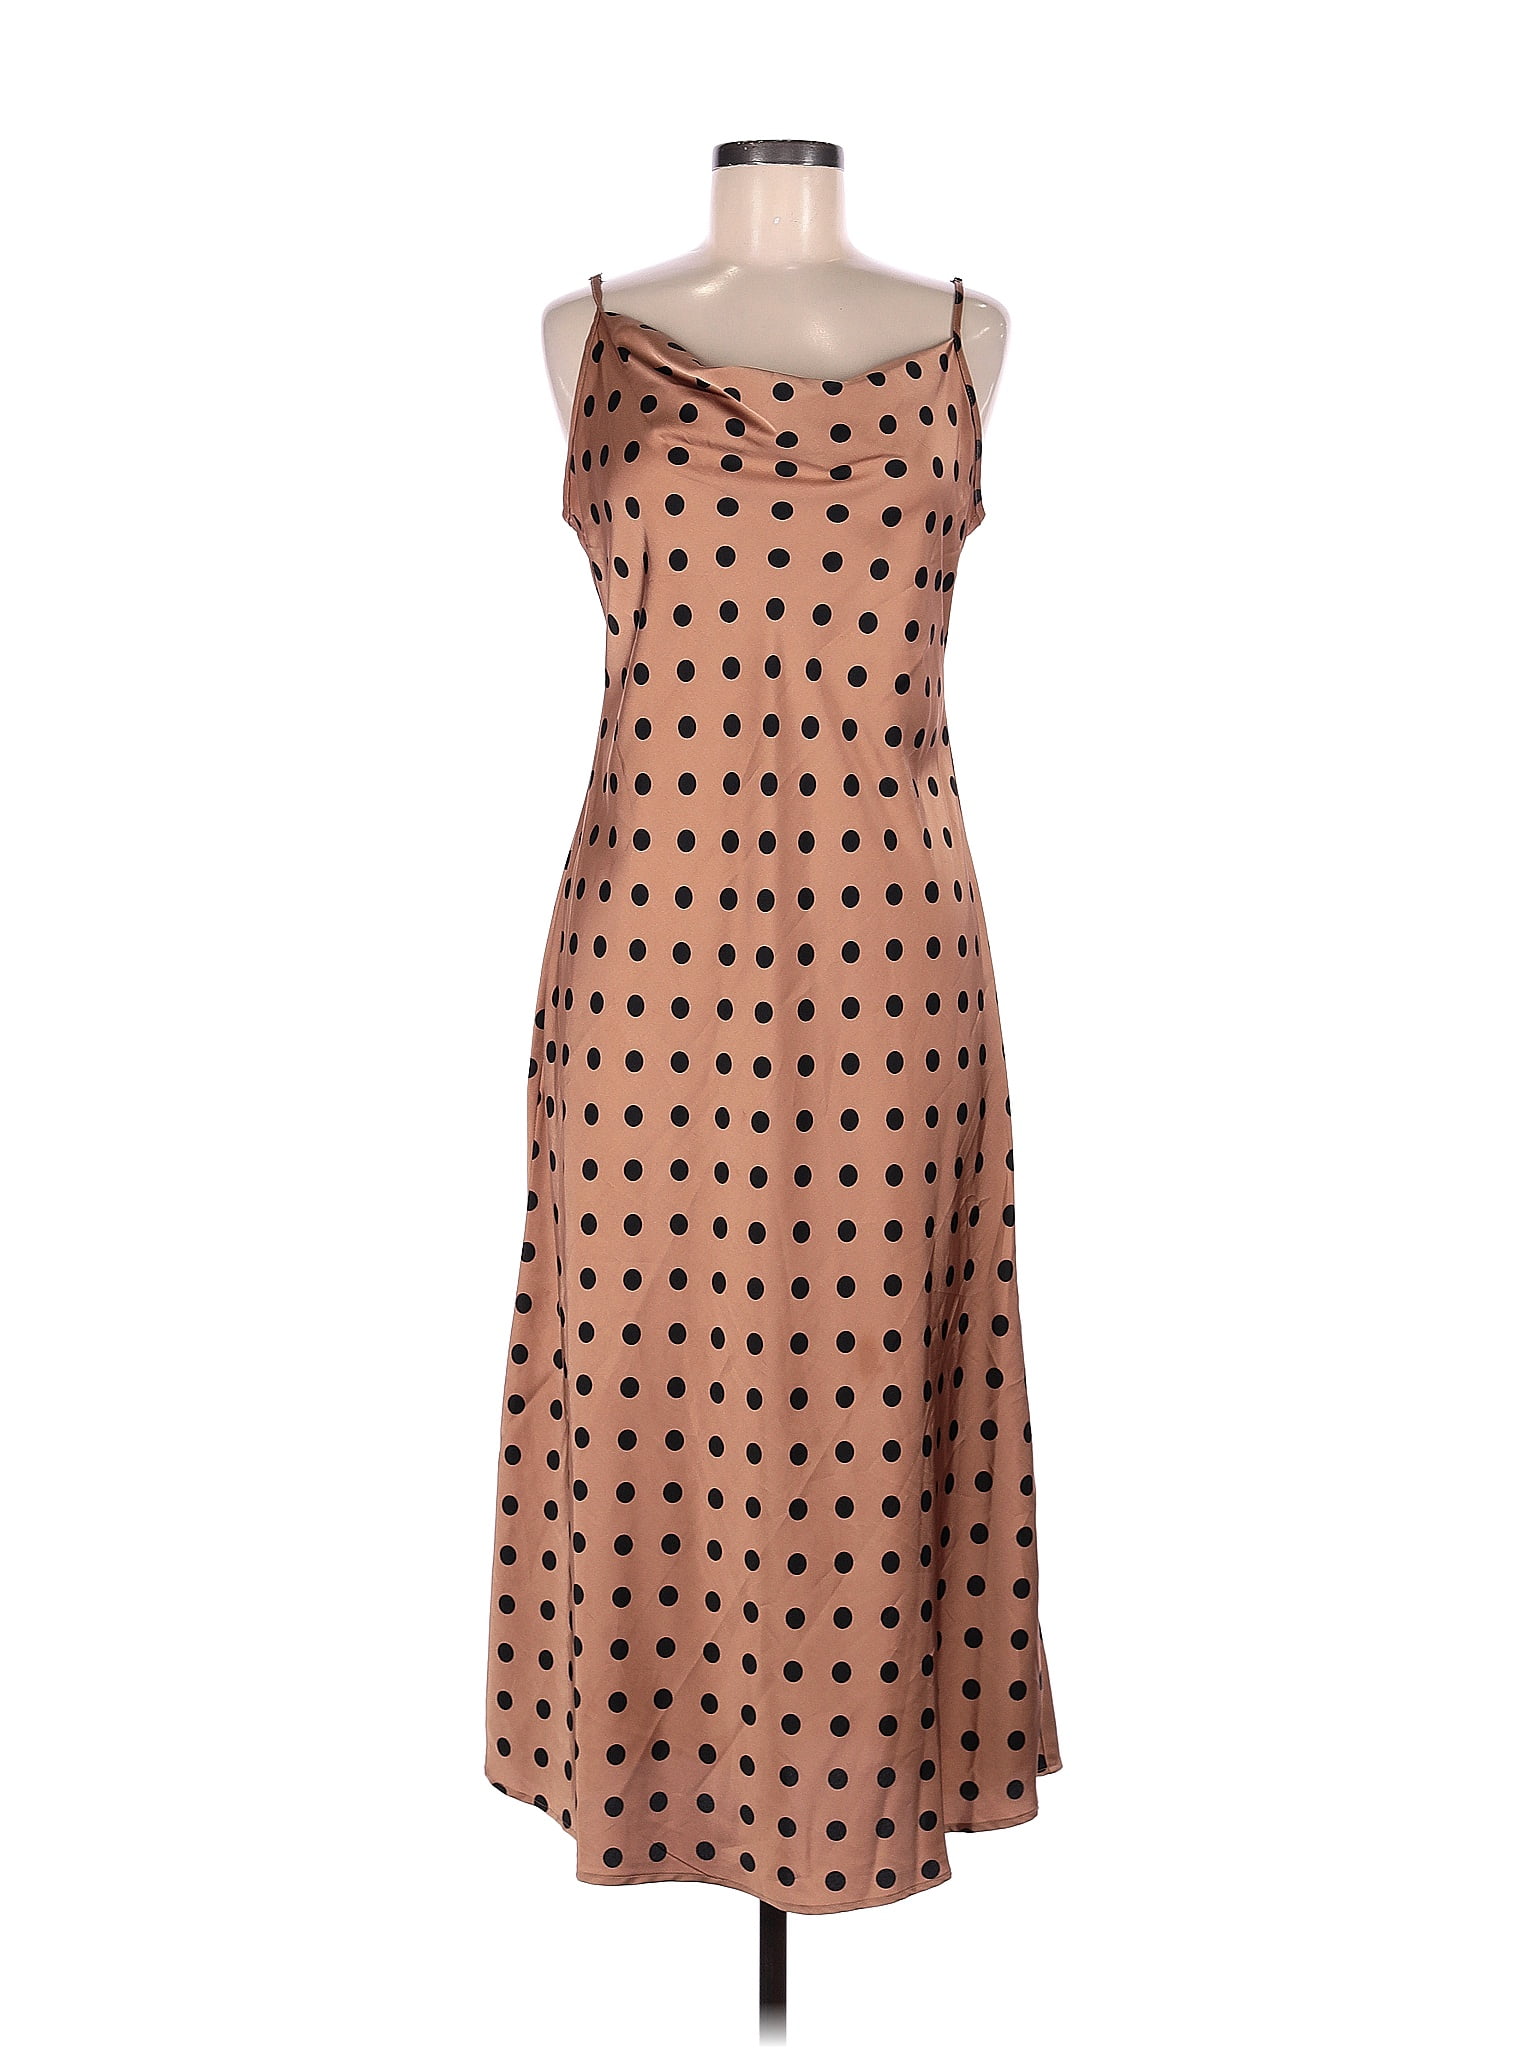 Nicole Miller Polka Dots Brown Casual Dress Size M - 80% off | thredUP